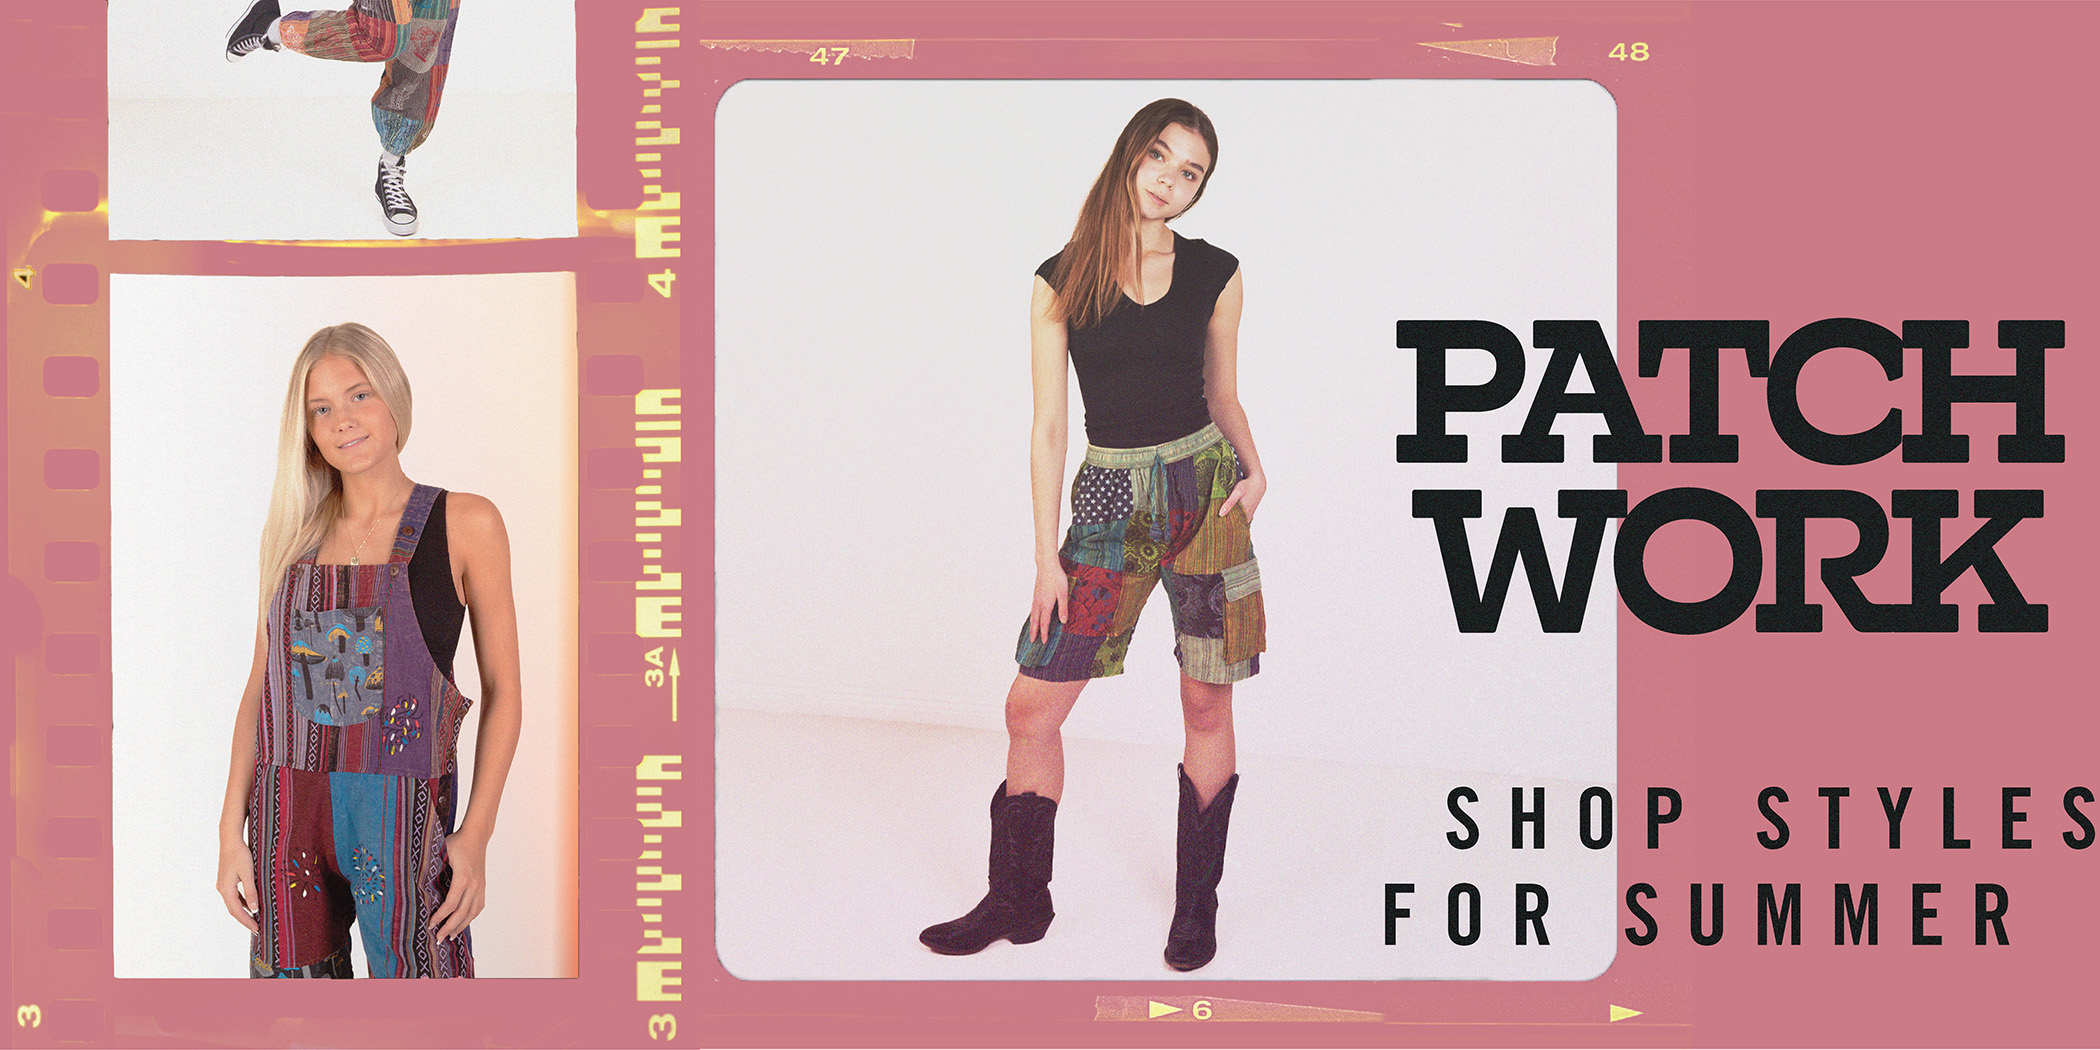 patchwork, shop styles for summer, 